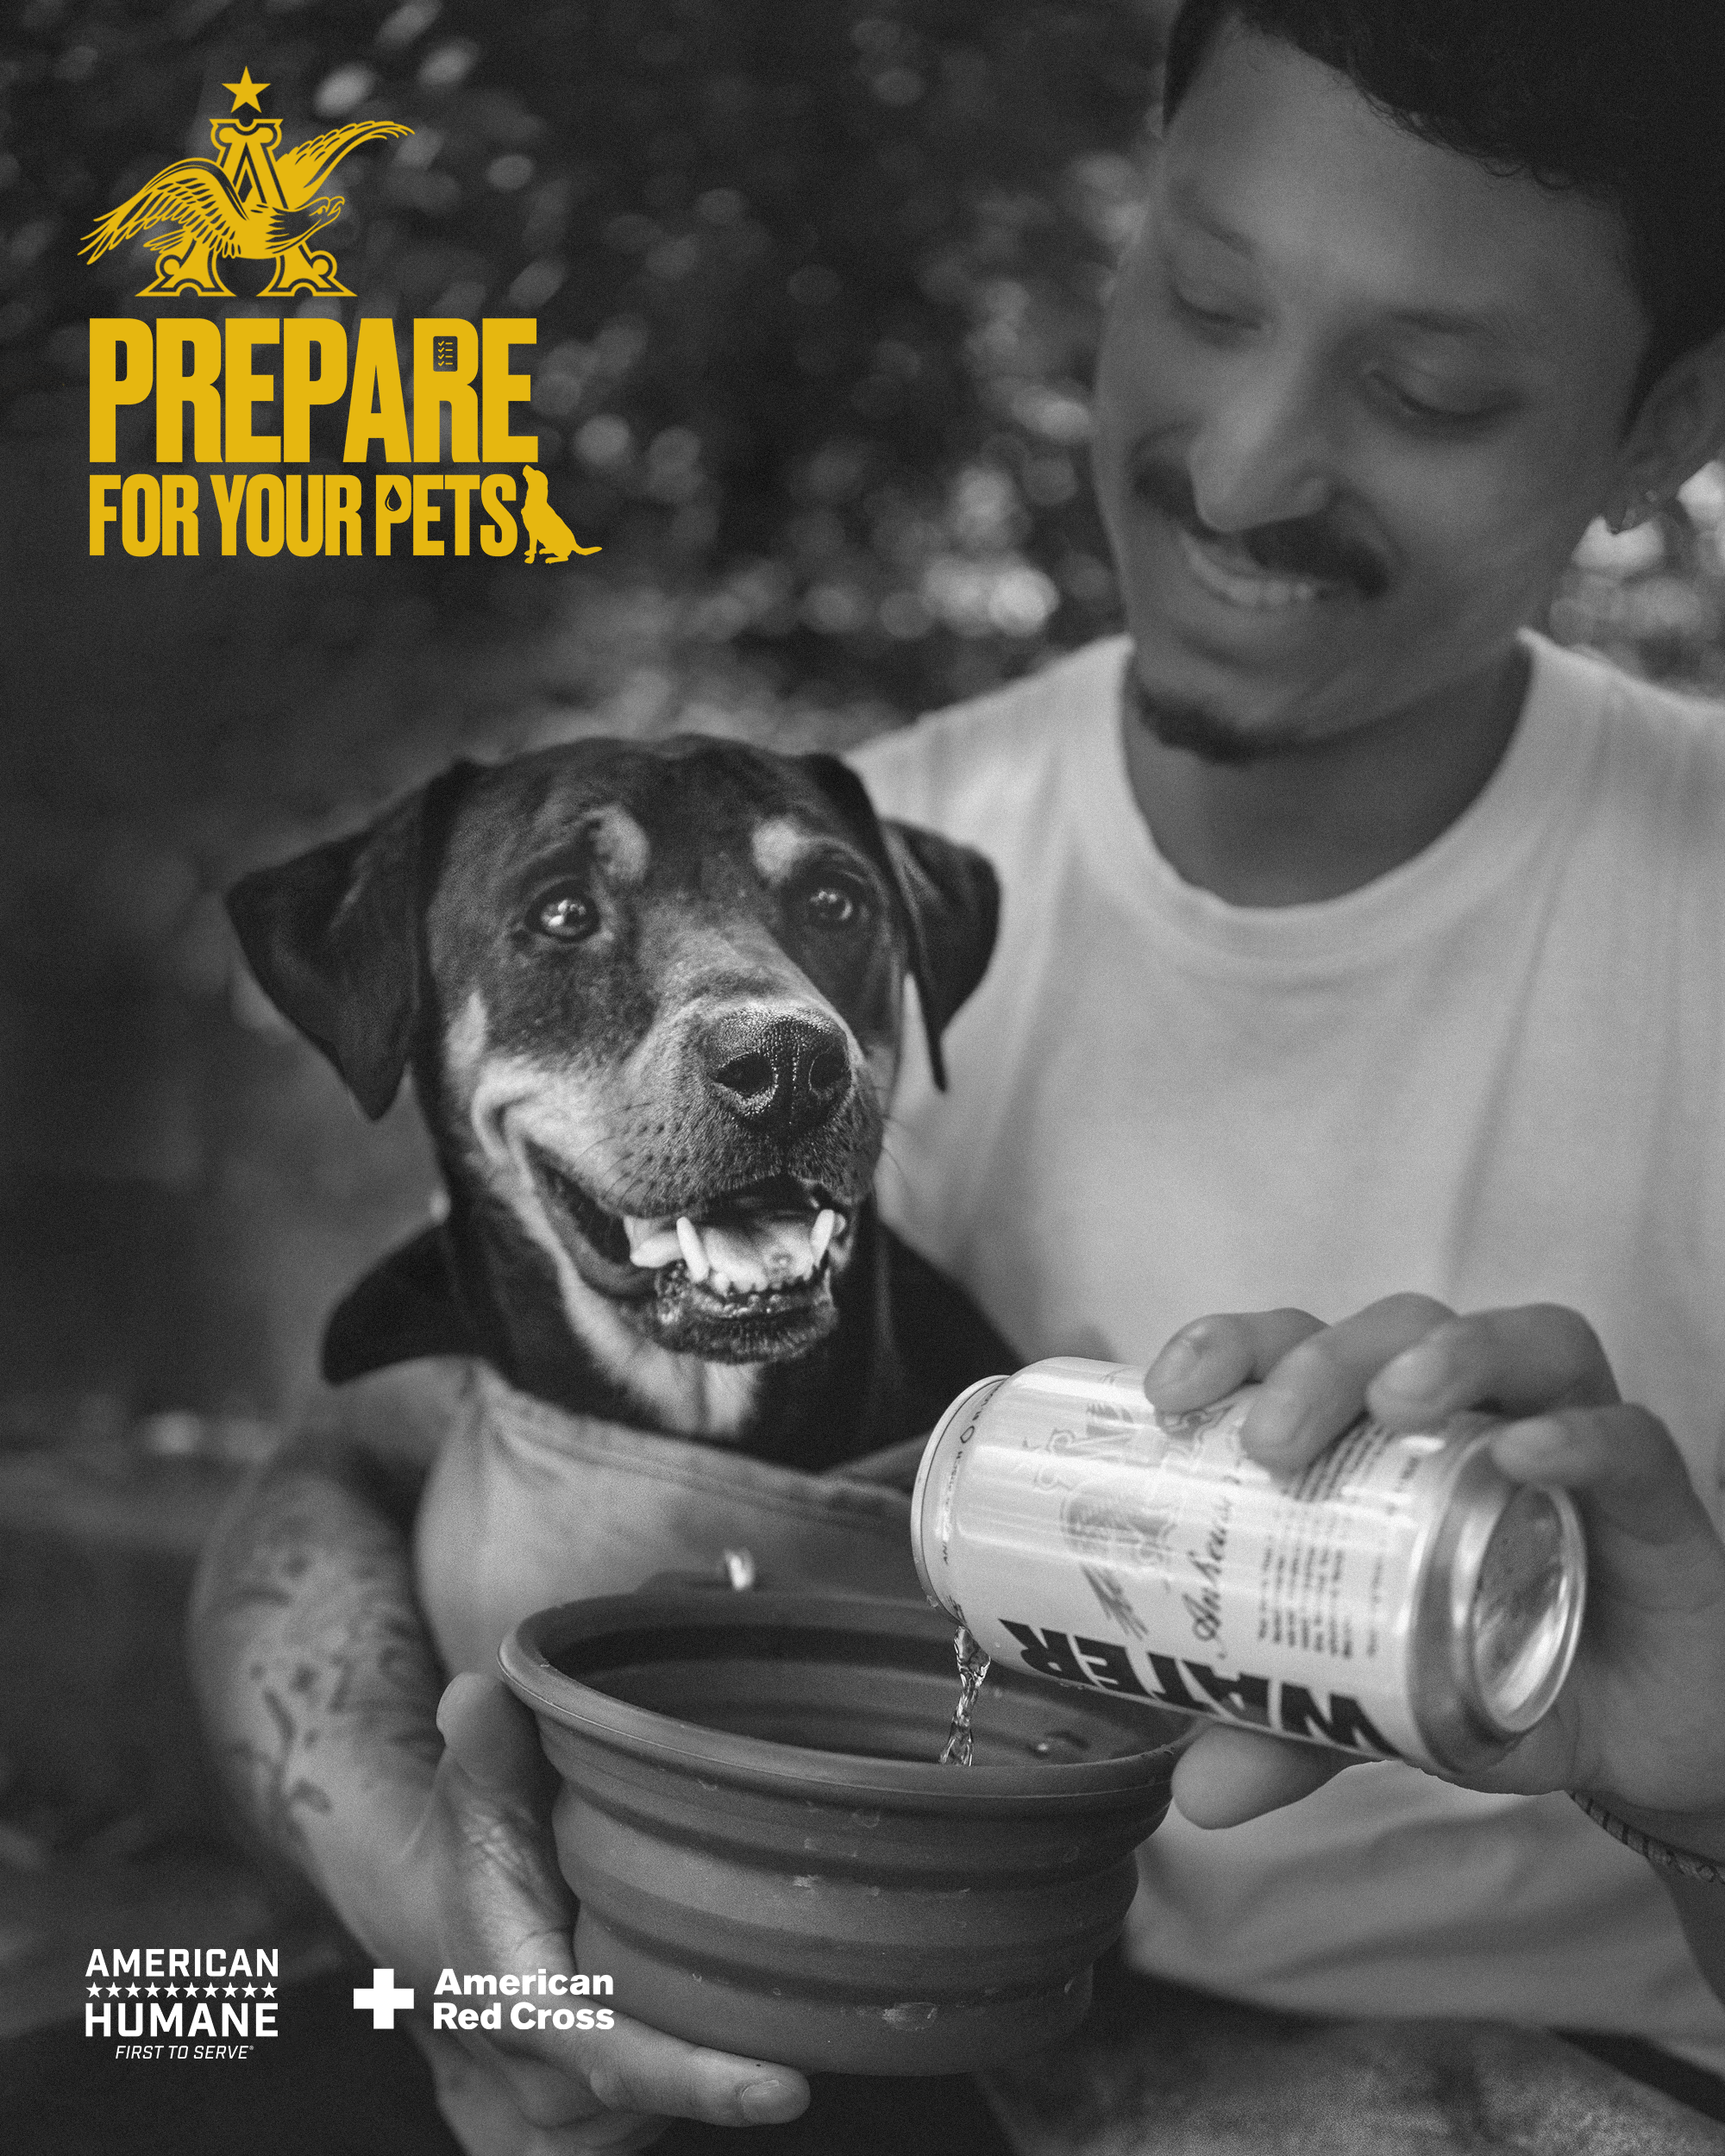 This National Preparedness Month, Anheuser-Busch is Mobilizing Communities Nationwide to Take a Big Step in Disaster Preparedness Efforts, Starting with One Small, Life-Saving Photo